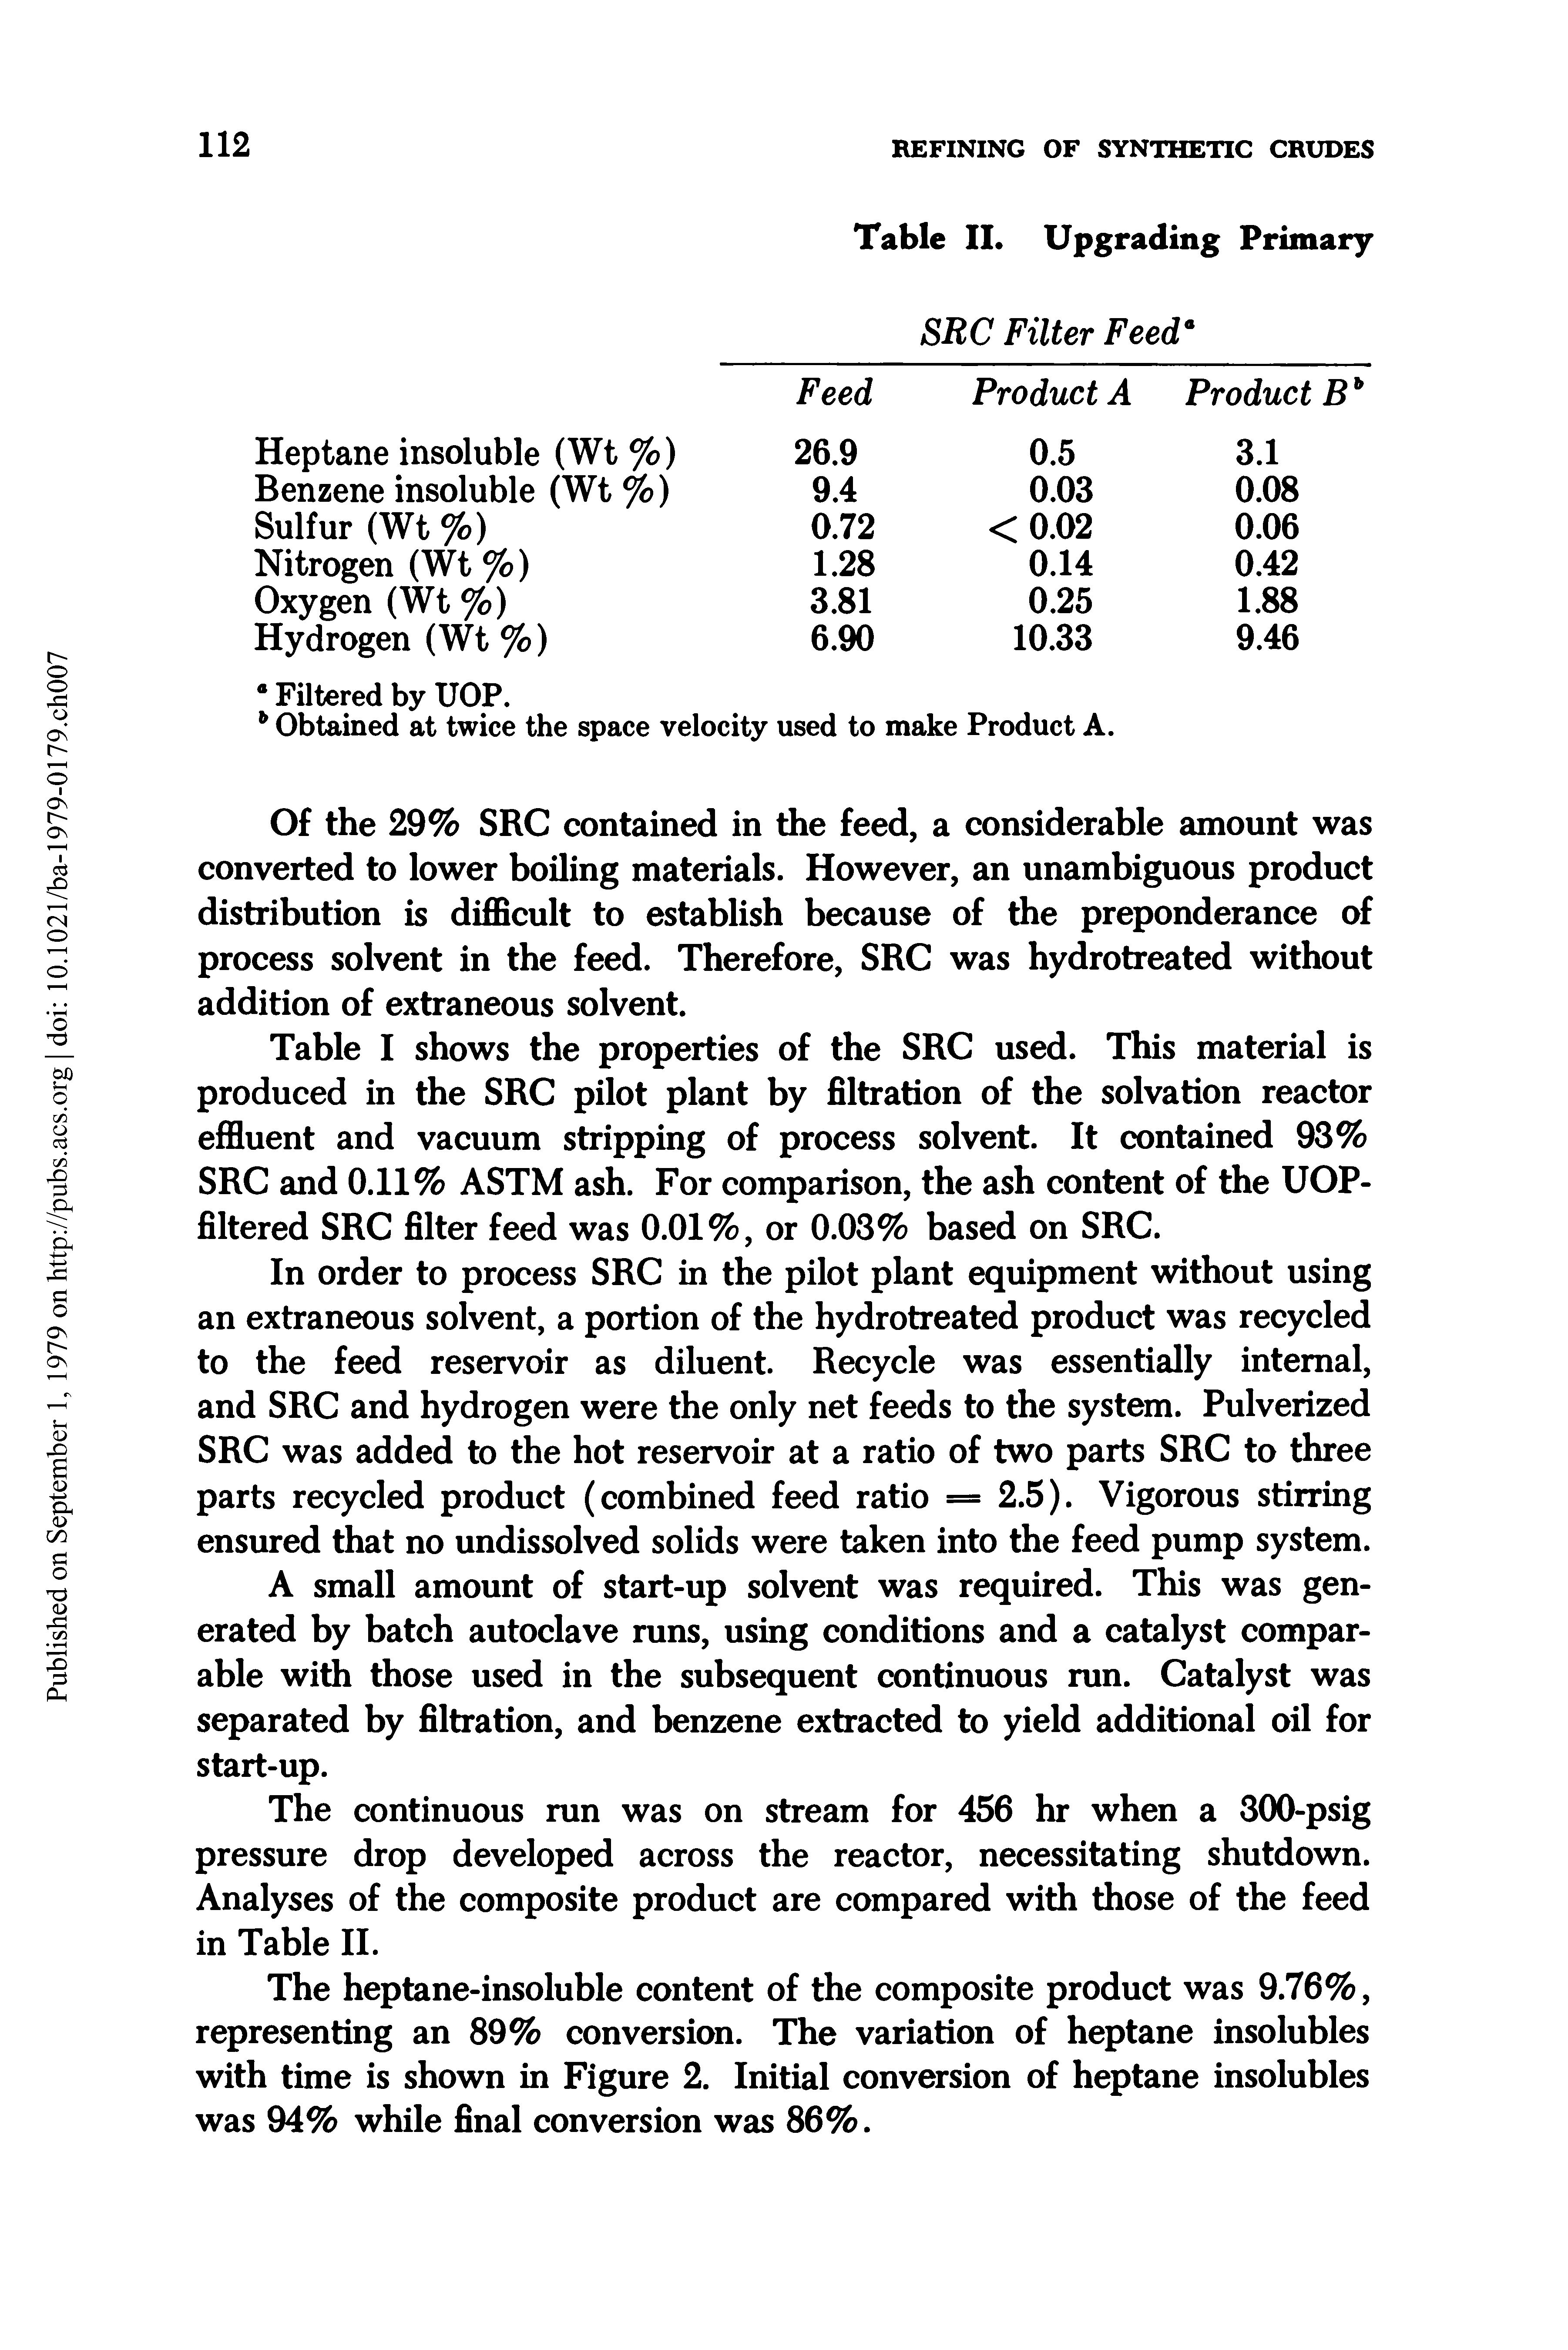 Table I shows the properties of the SRC used. This material is produced in the SRC pilot plant by filtration of the solvation reactor effluent and vacuum stripping of process solvent. It contained 93% SRC and 0.11% ASTM ash. For comparison, the ash content of the UOP-filtered SRC filter feed was 0.01%, or 0.03% based on SRC.